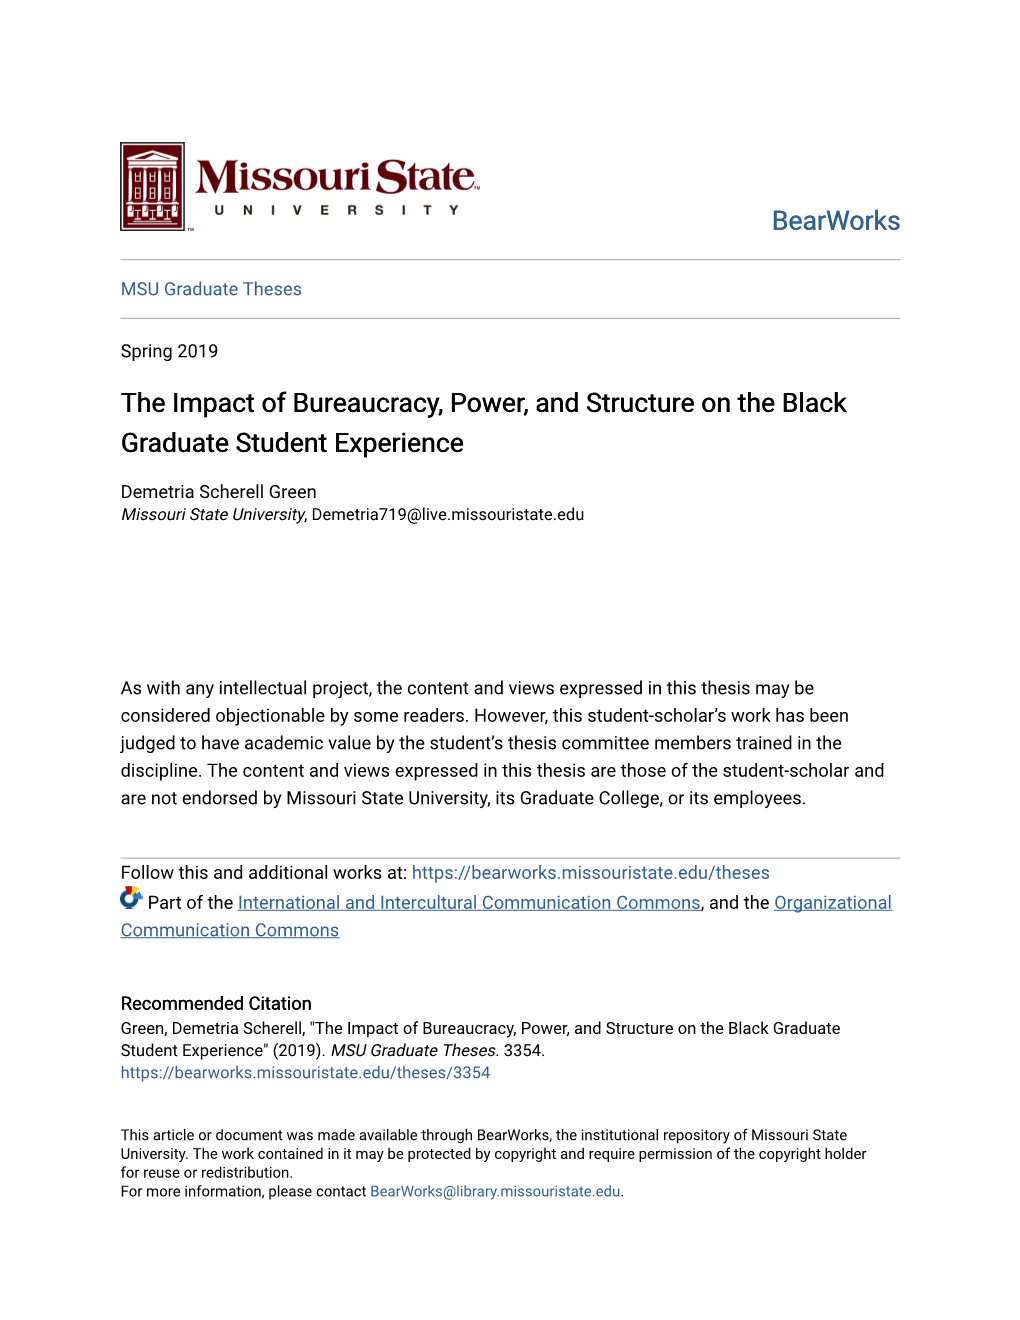 The Impact of Bureaucracy, Power, and Structure on the Black Graduate Student Experience